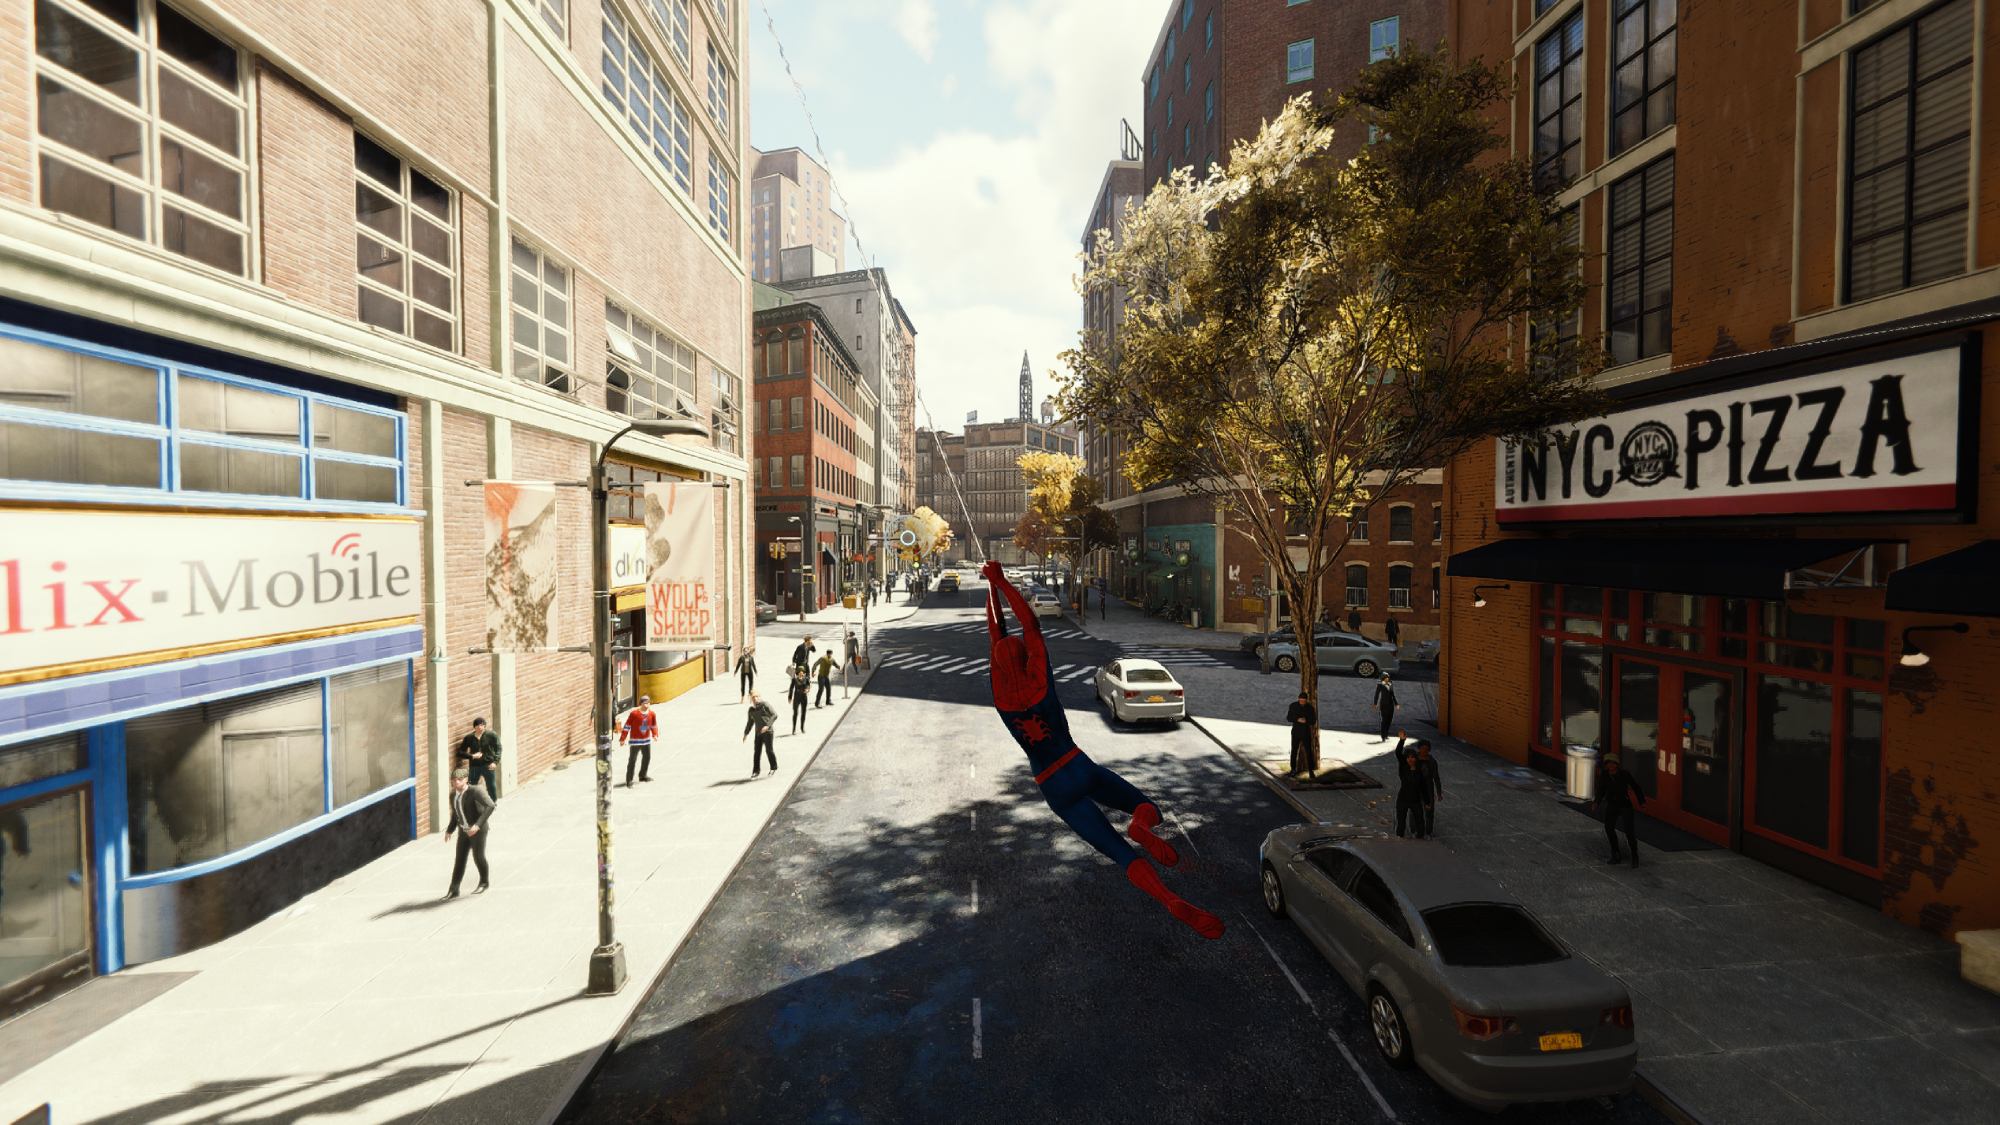 Spider-Man Remastered: This is how it runs on PC